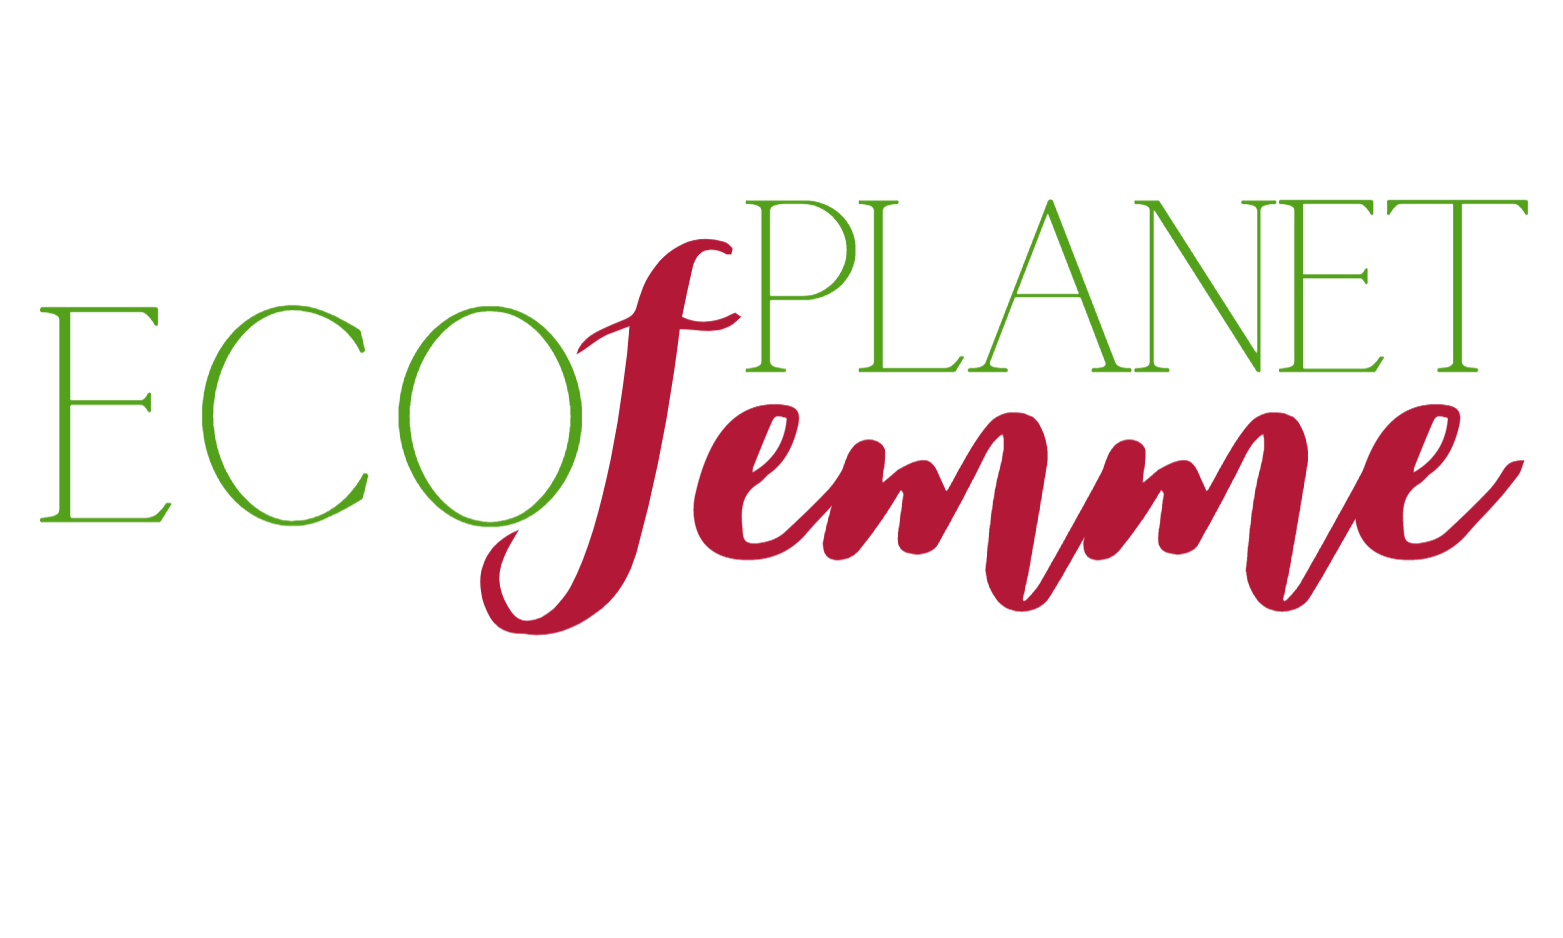 EcoFemme For the Planet